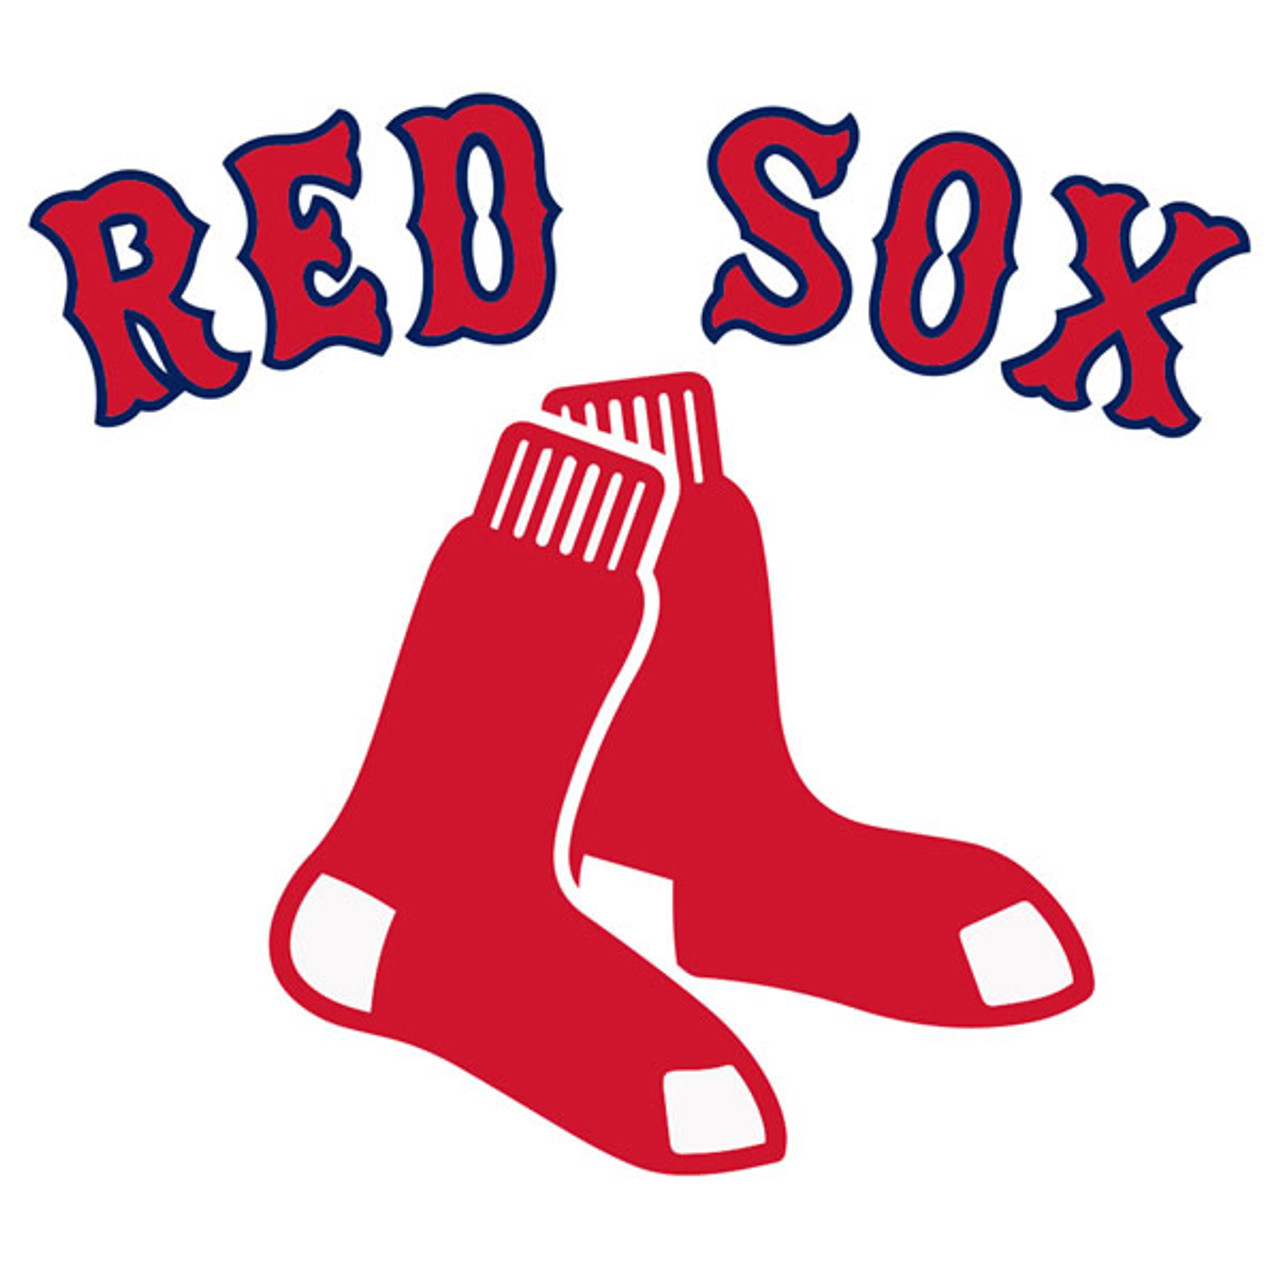 Buy red sox hockey jersey - OFF-56% > Free Delivery